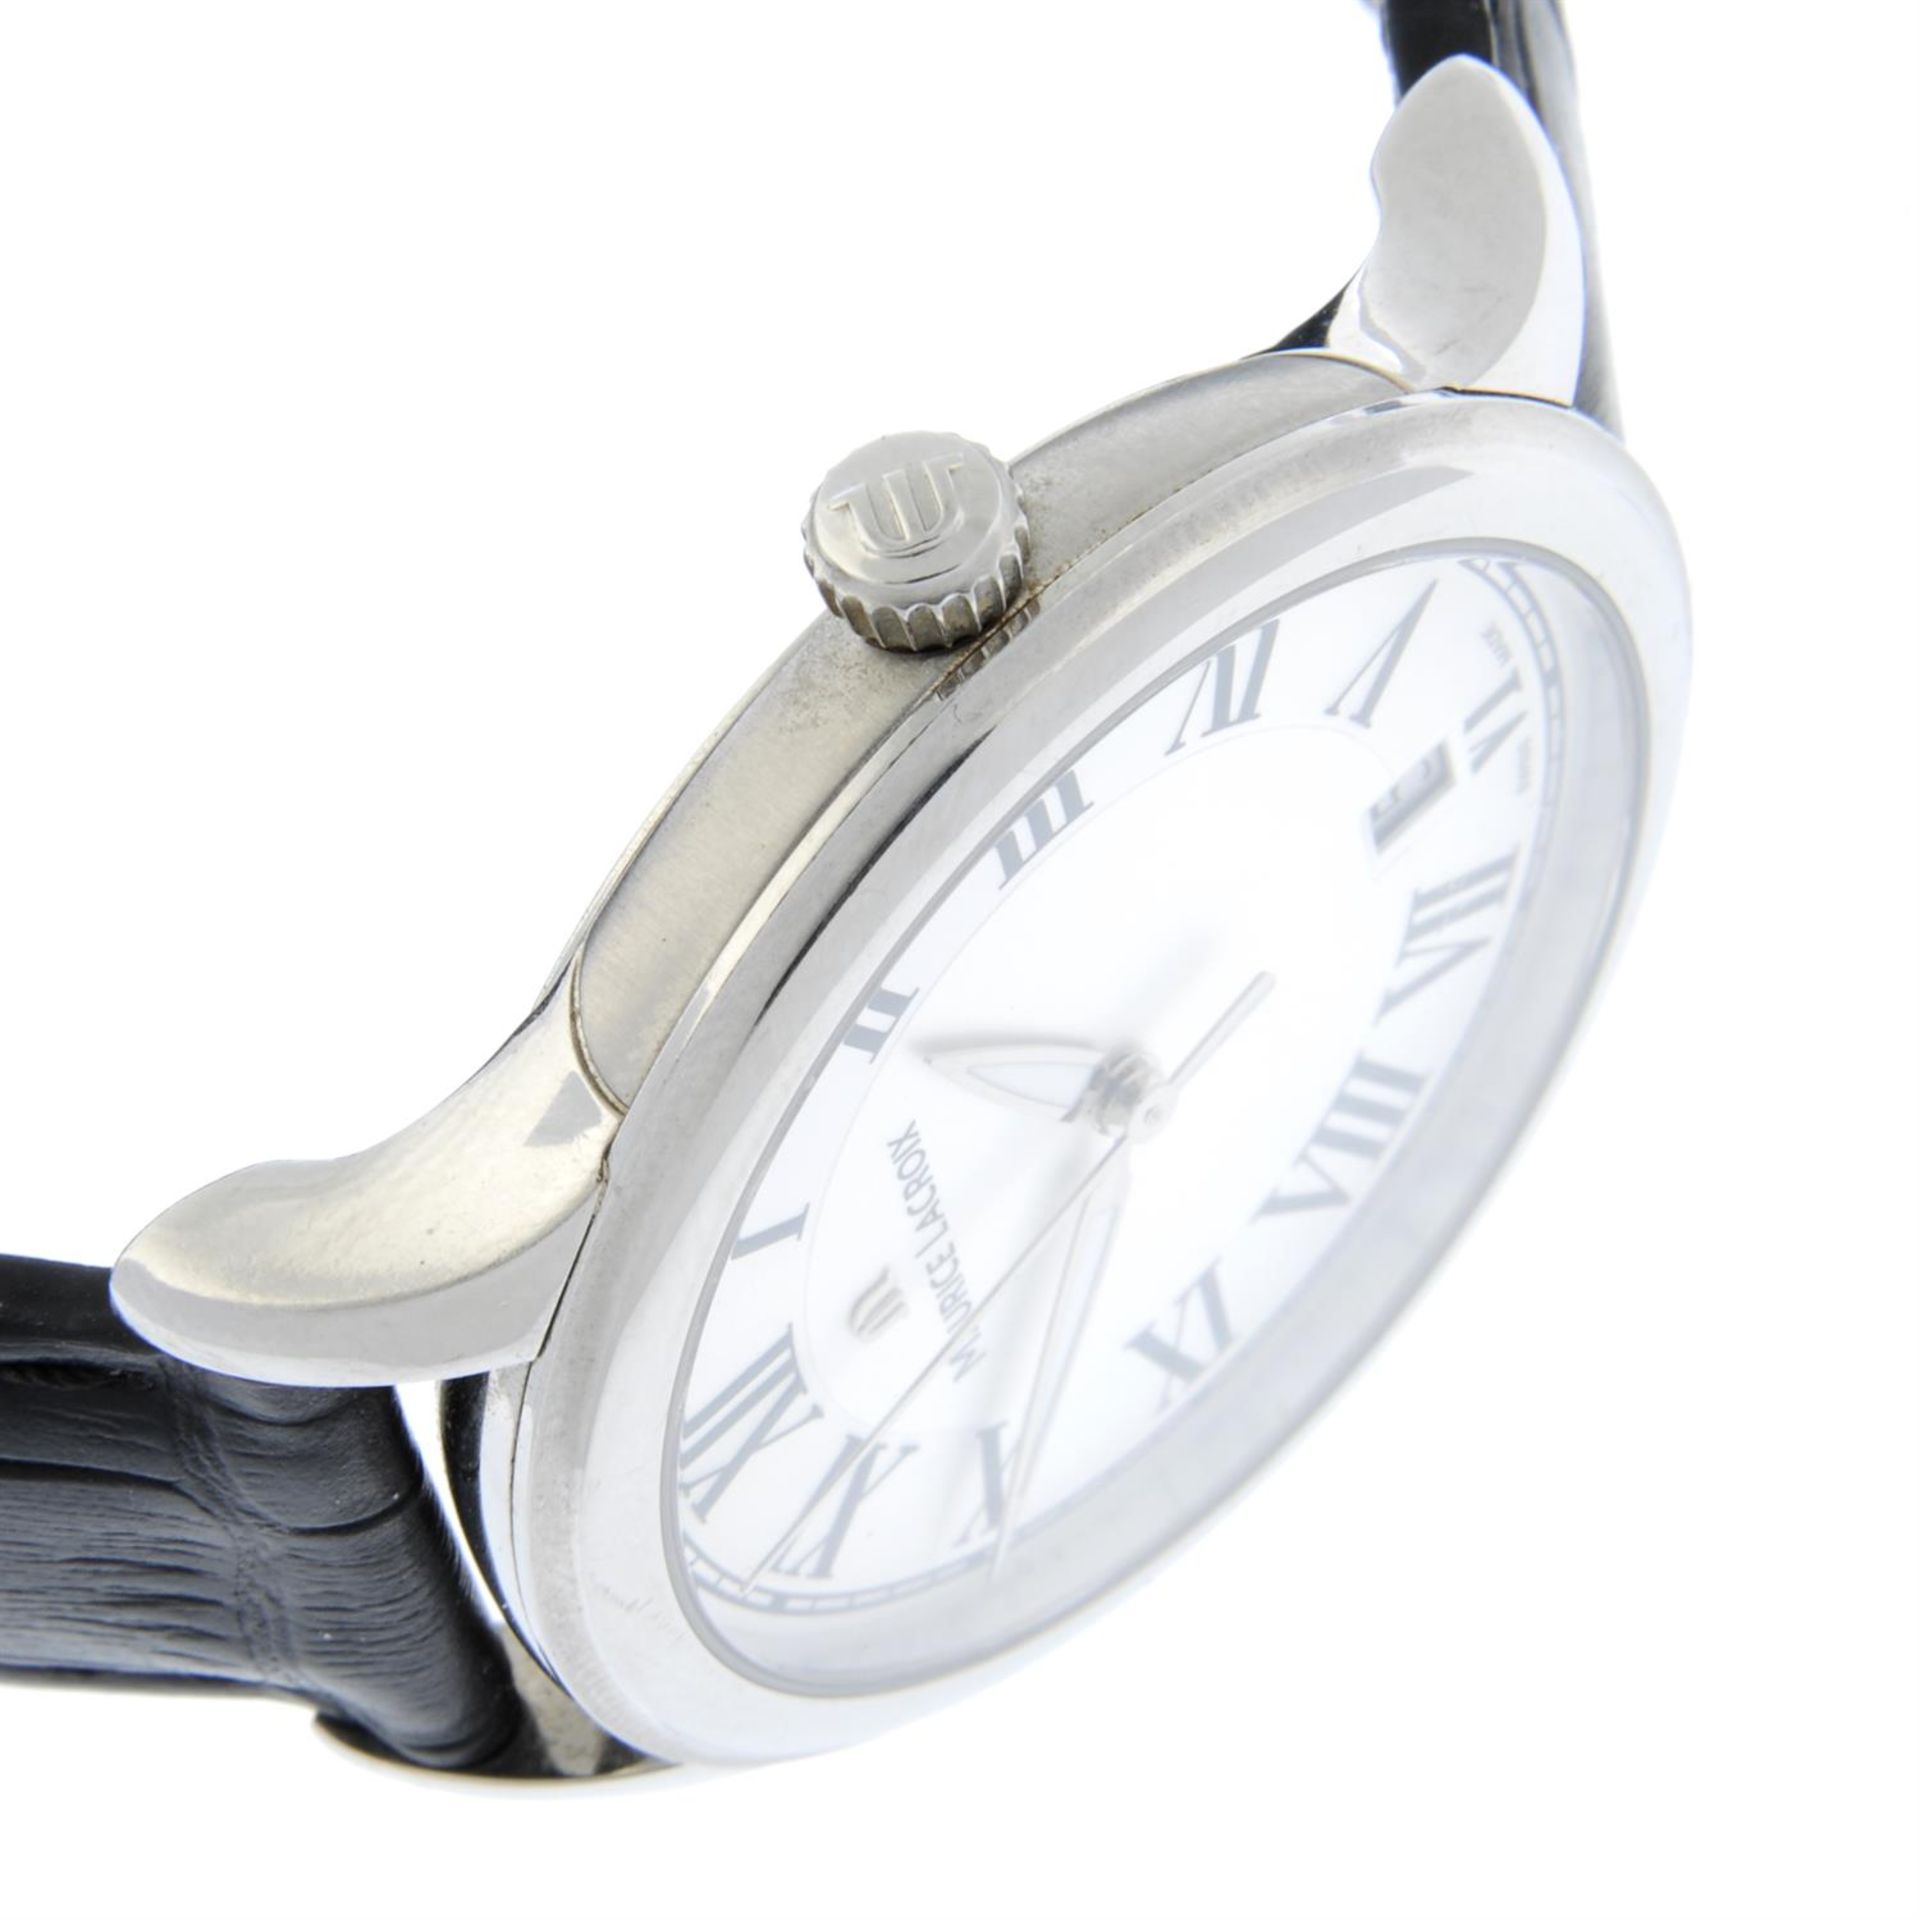 MAURICE LACROIX - a stainless steel Les Classiques wrist watch, 37mm. - Image 3 of 4